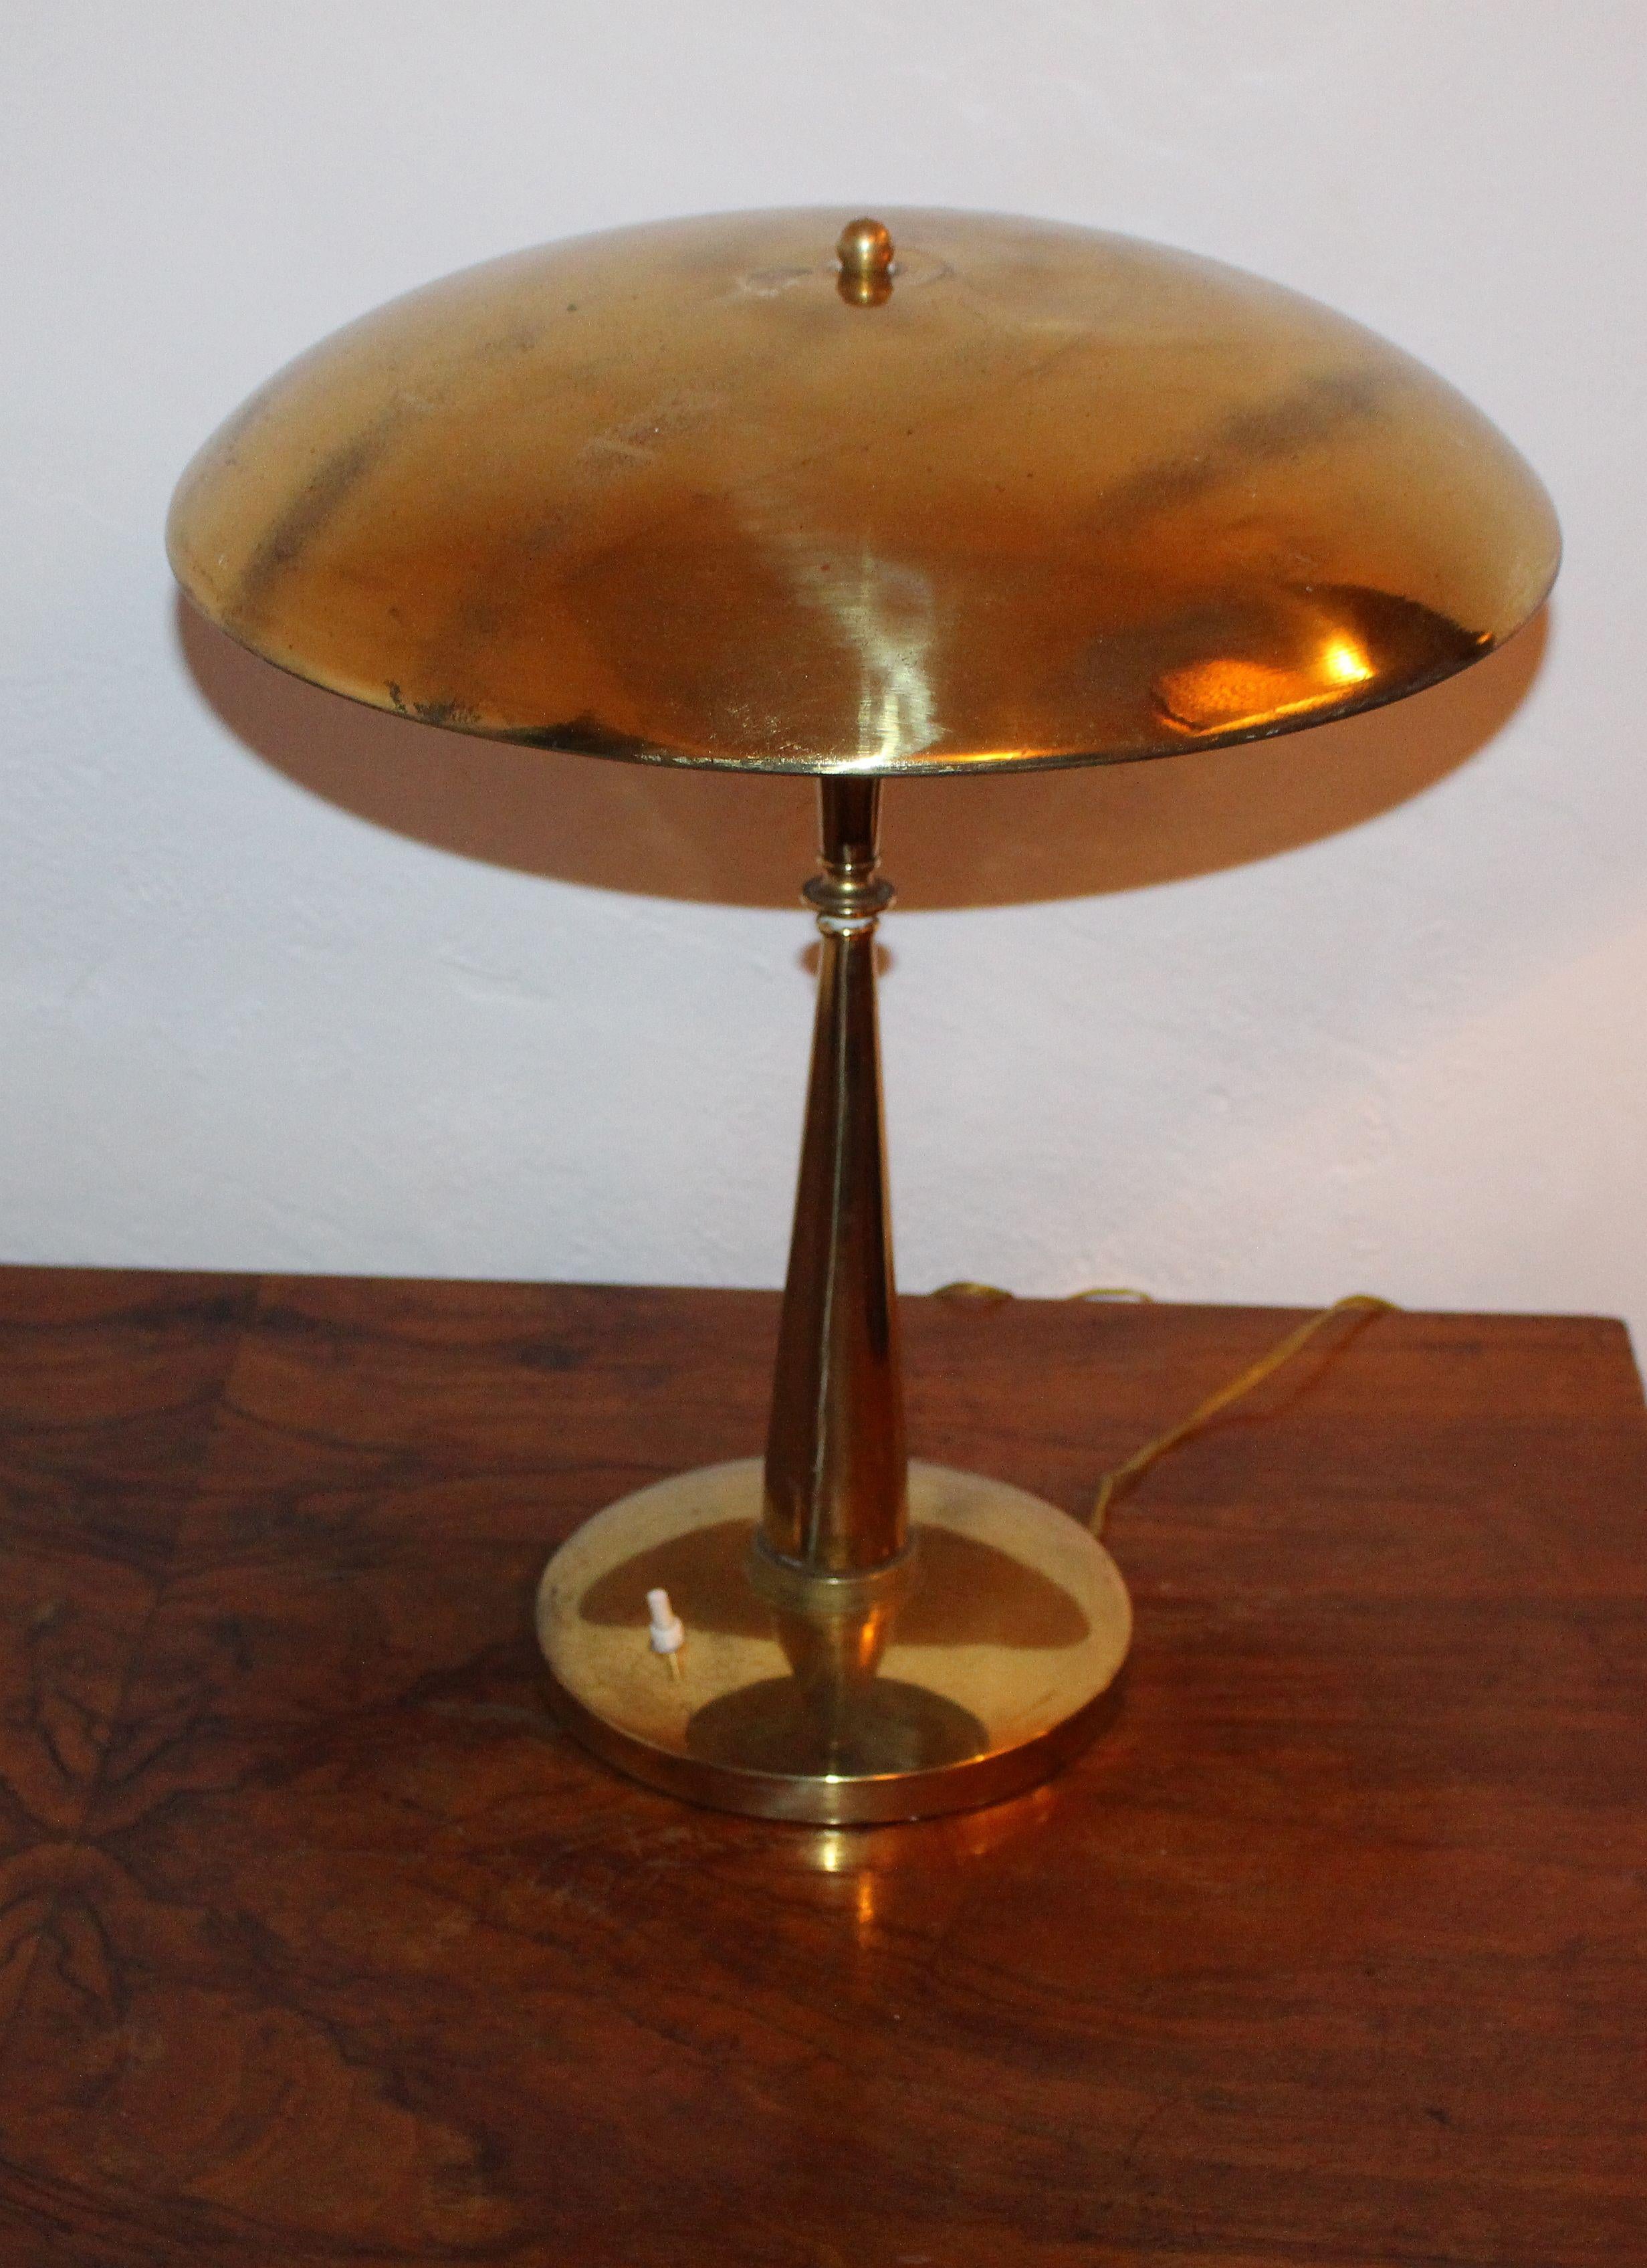 Italian brass table, desk lamp. Bottom base is 7 inches in diameter shade is 18 inch diameter. Glass diffuser under the brass shade.
  